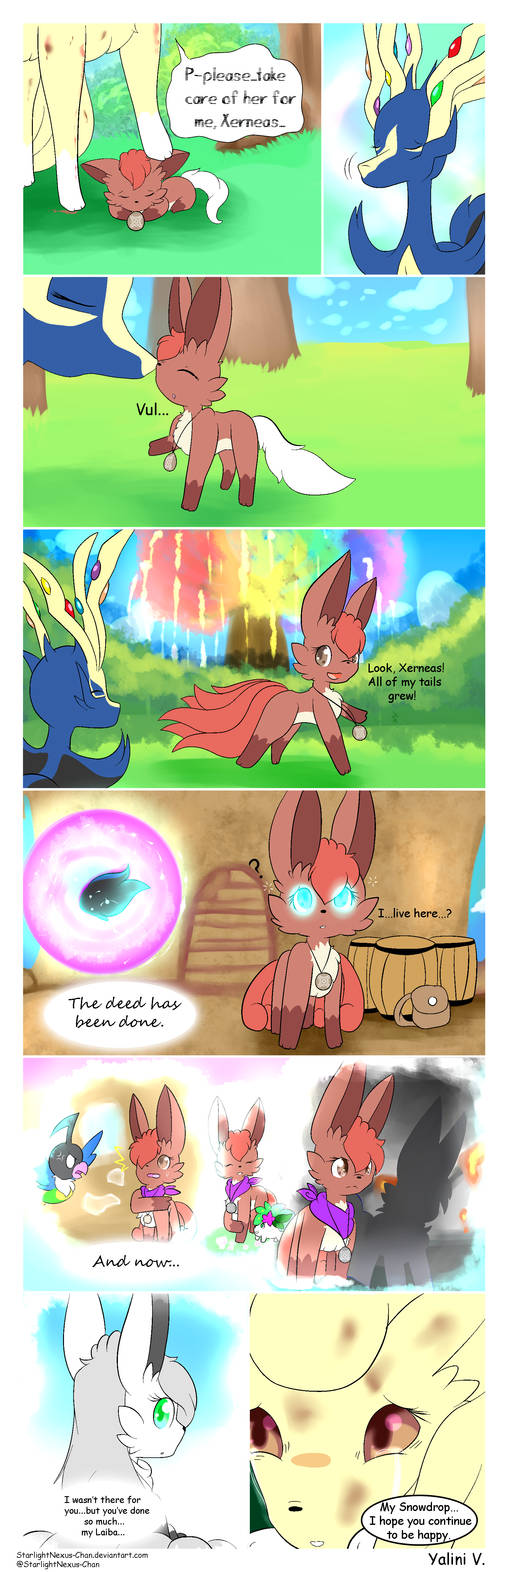 Heartgold pmd playthrough by akarifan25 on DeviantArt